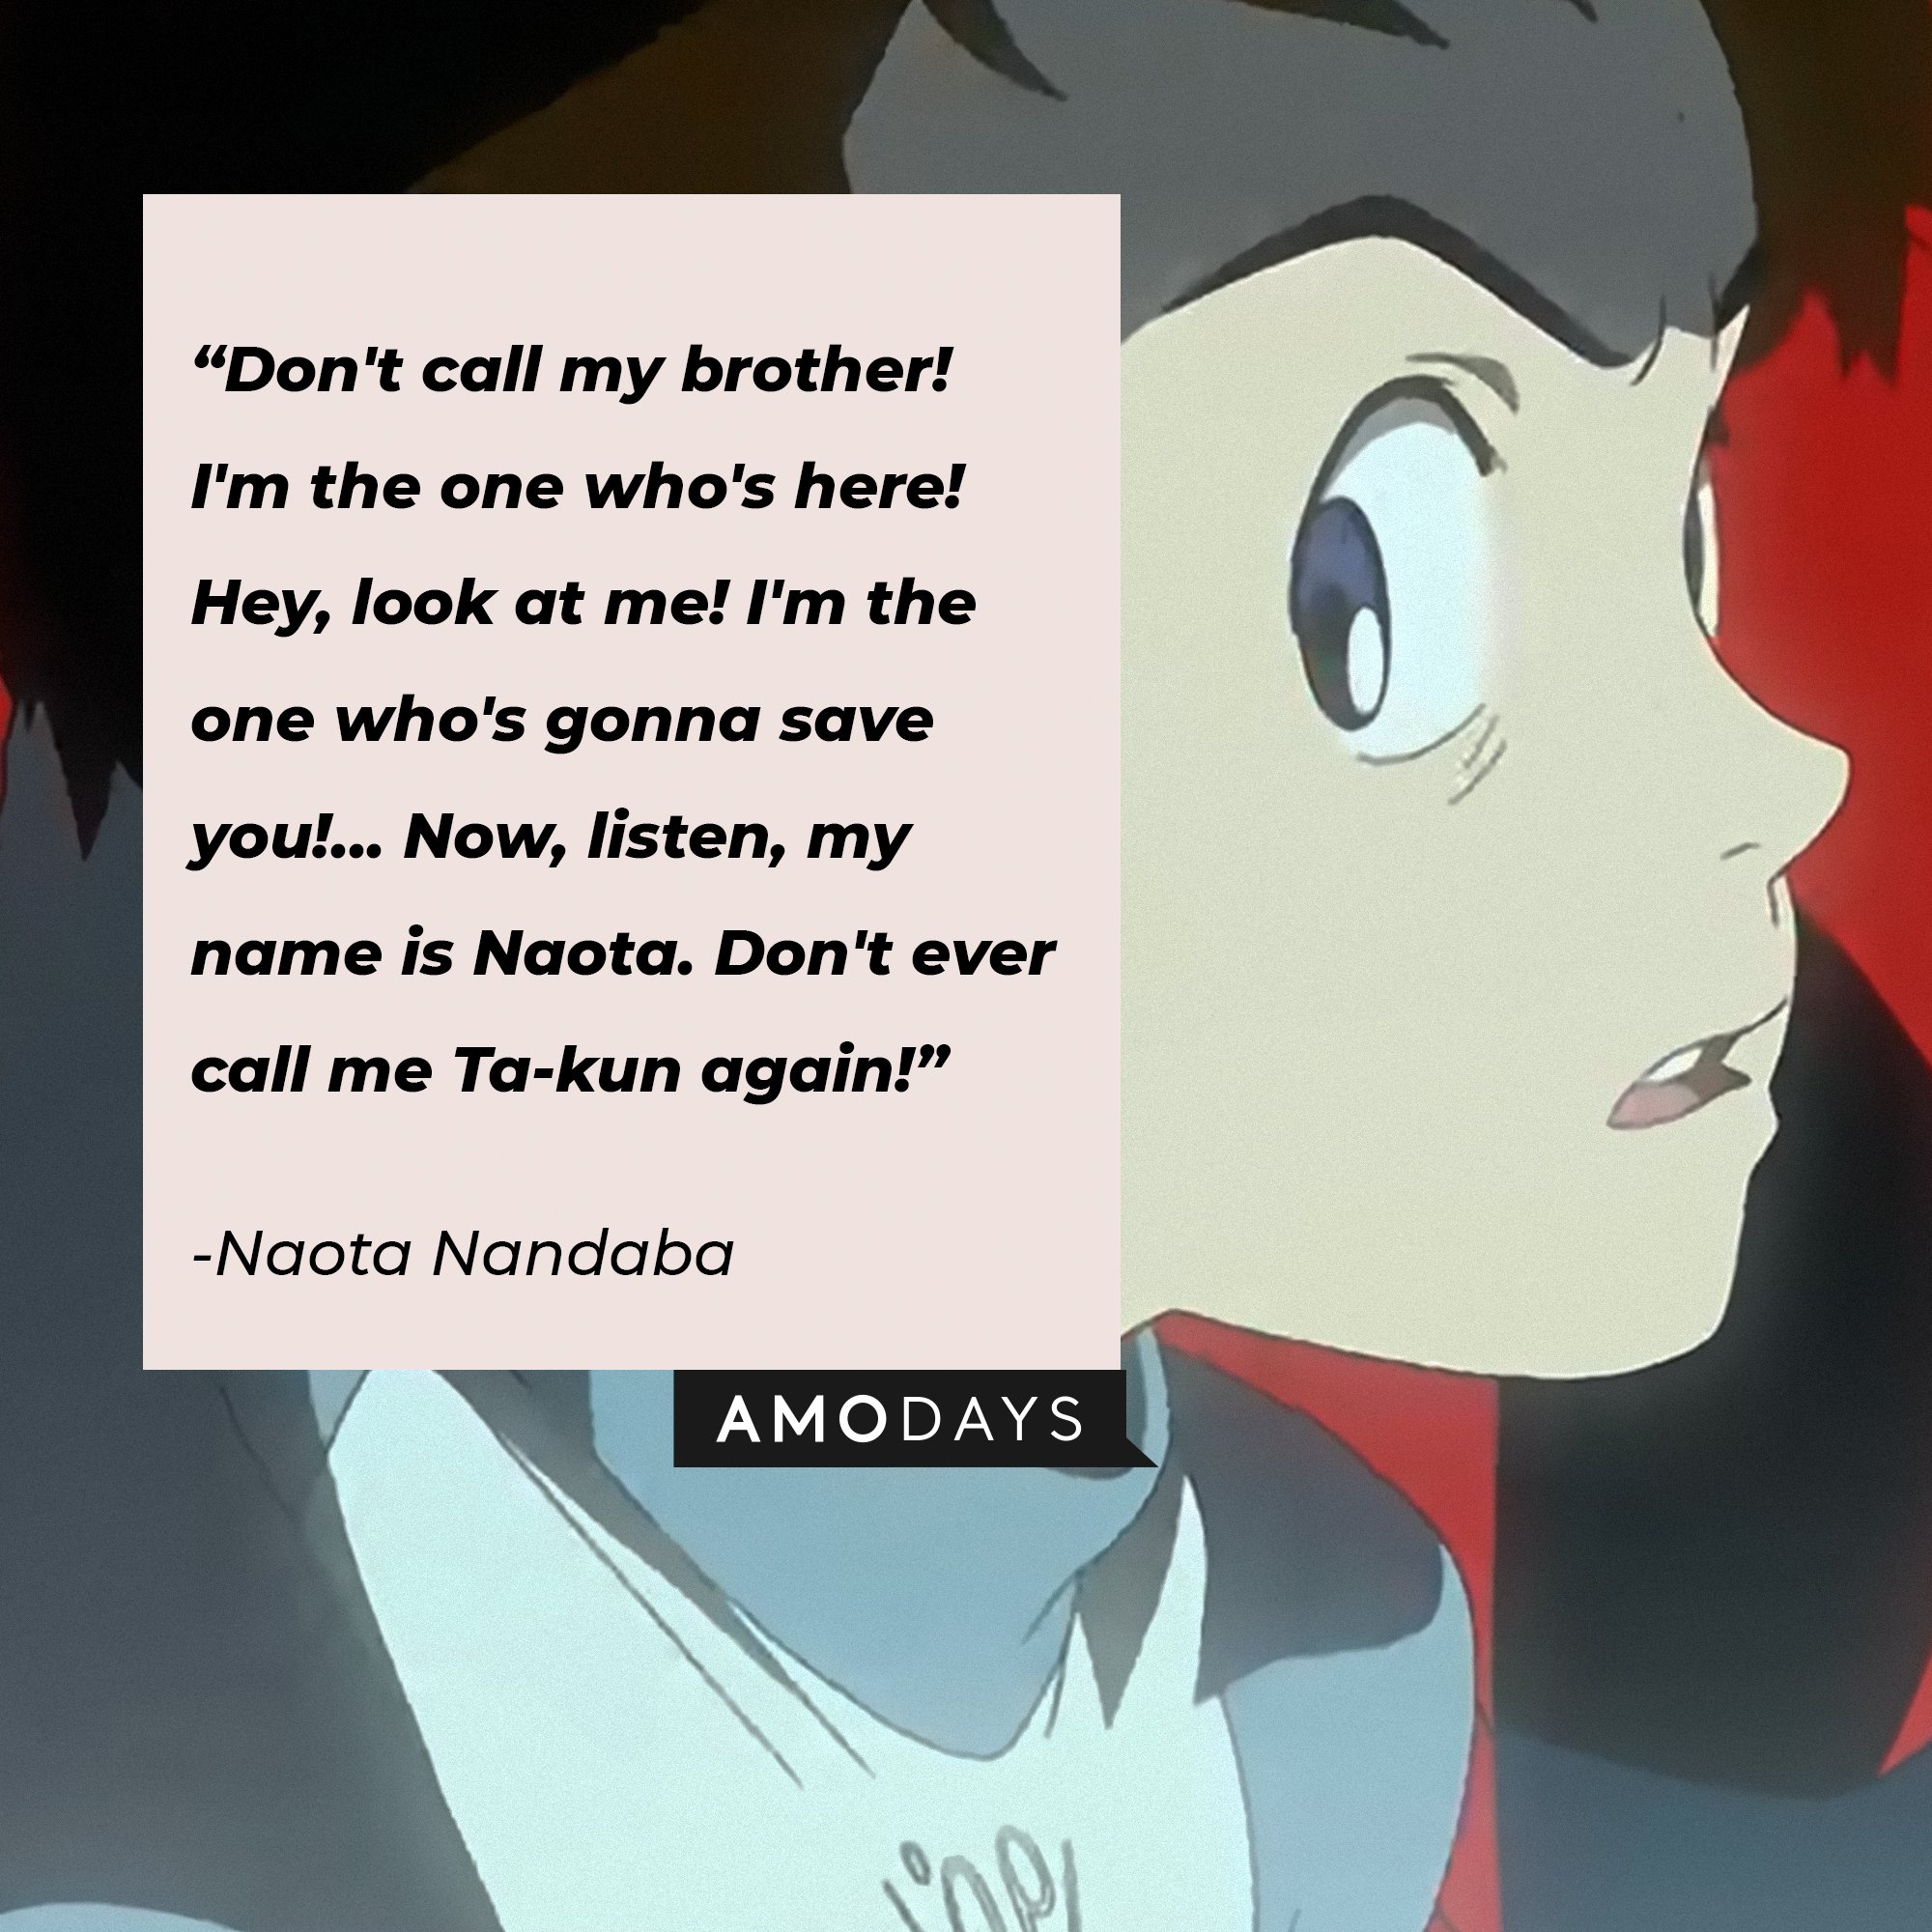 Naota Nandaba’s quote: "Don't call my brother! I'm the one who's here! Hey, look at me! I'm the one who's gonna save you!... Now, listen, my name is Naota. Don't ever call me Ta-kun again!" | Image: AmoDays